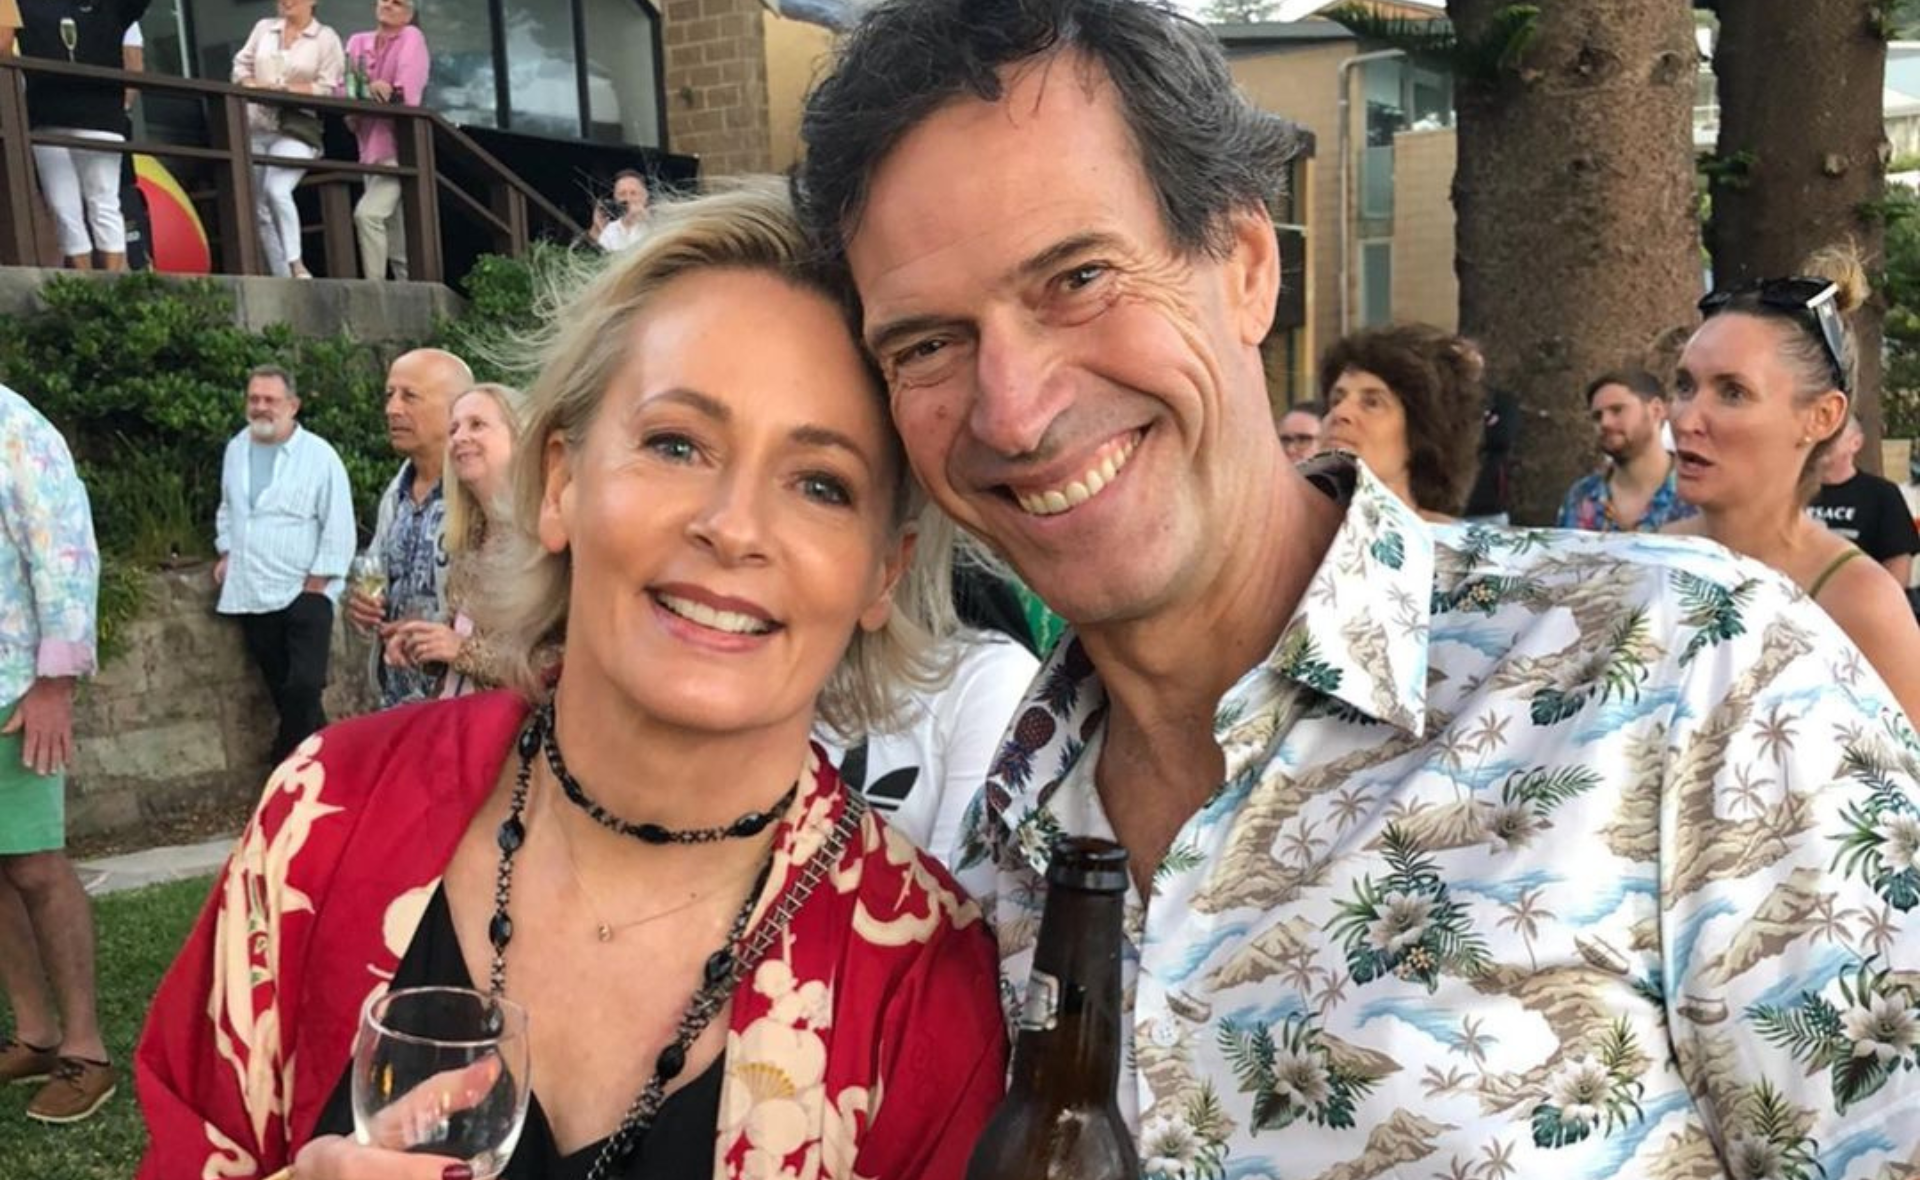 Not even their marriages can compare to Amanda Keller and Brendan Jones’ friendship